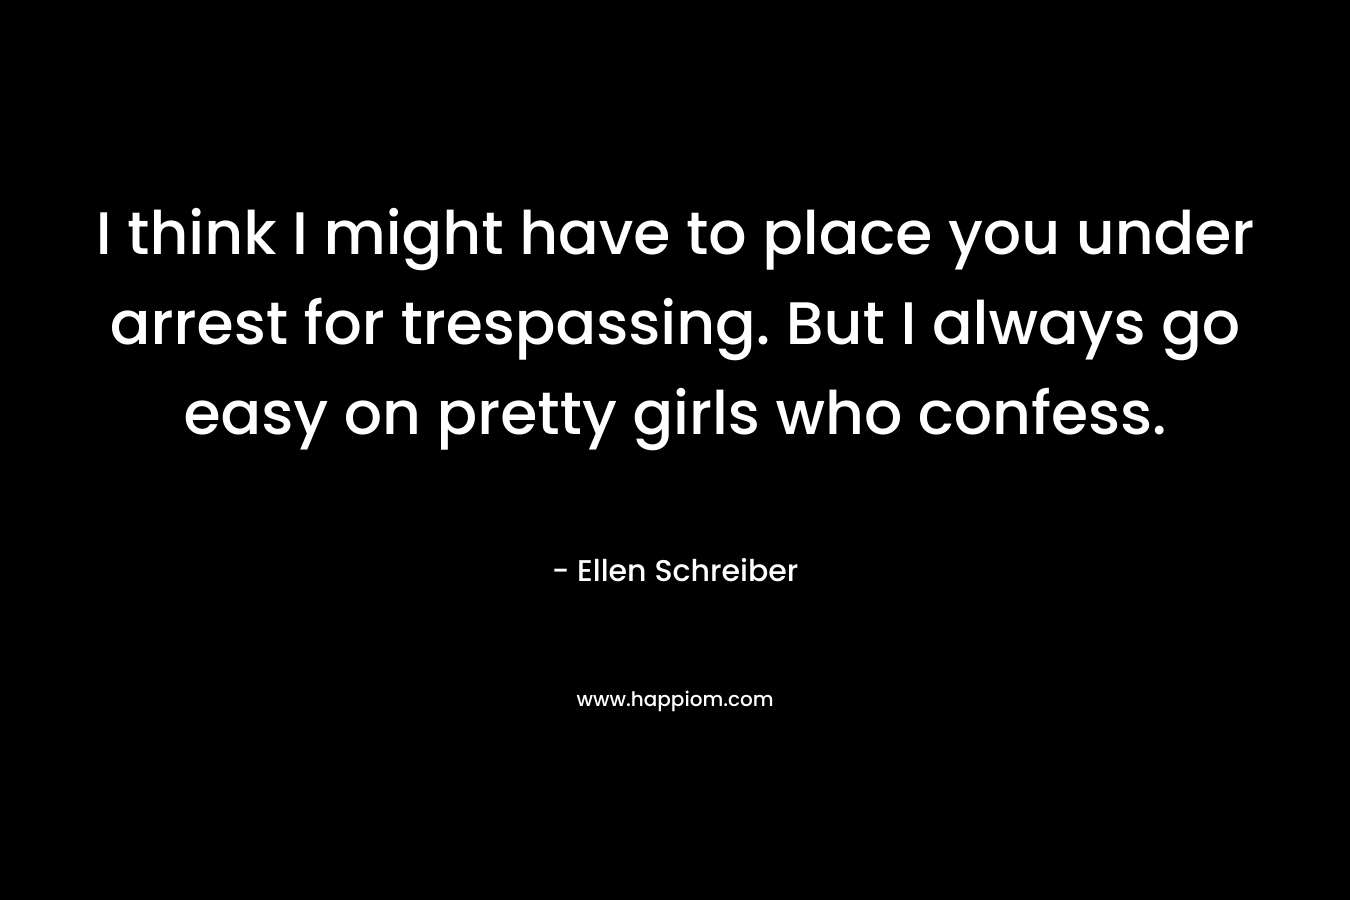 I think I might have to place you under arrest for trespassing. But I always go easy on pretty girls who confess. – Ellen Schreiber